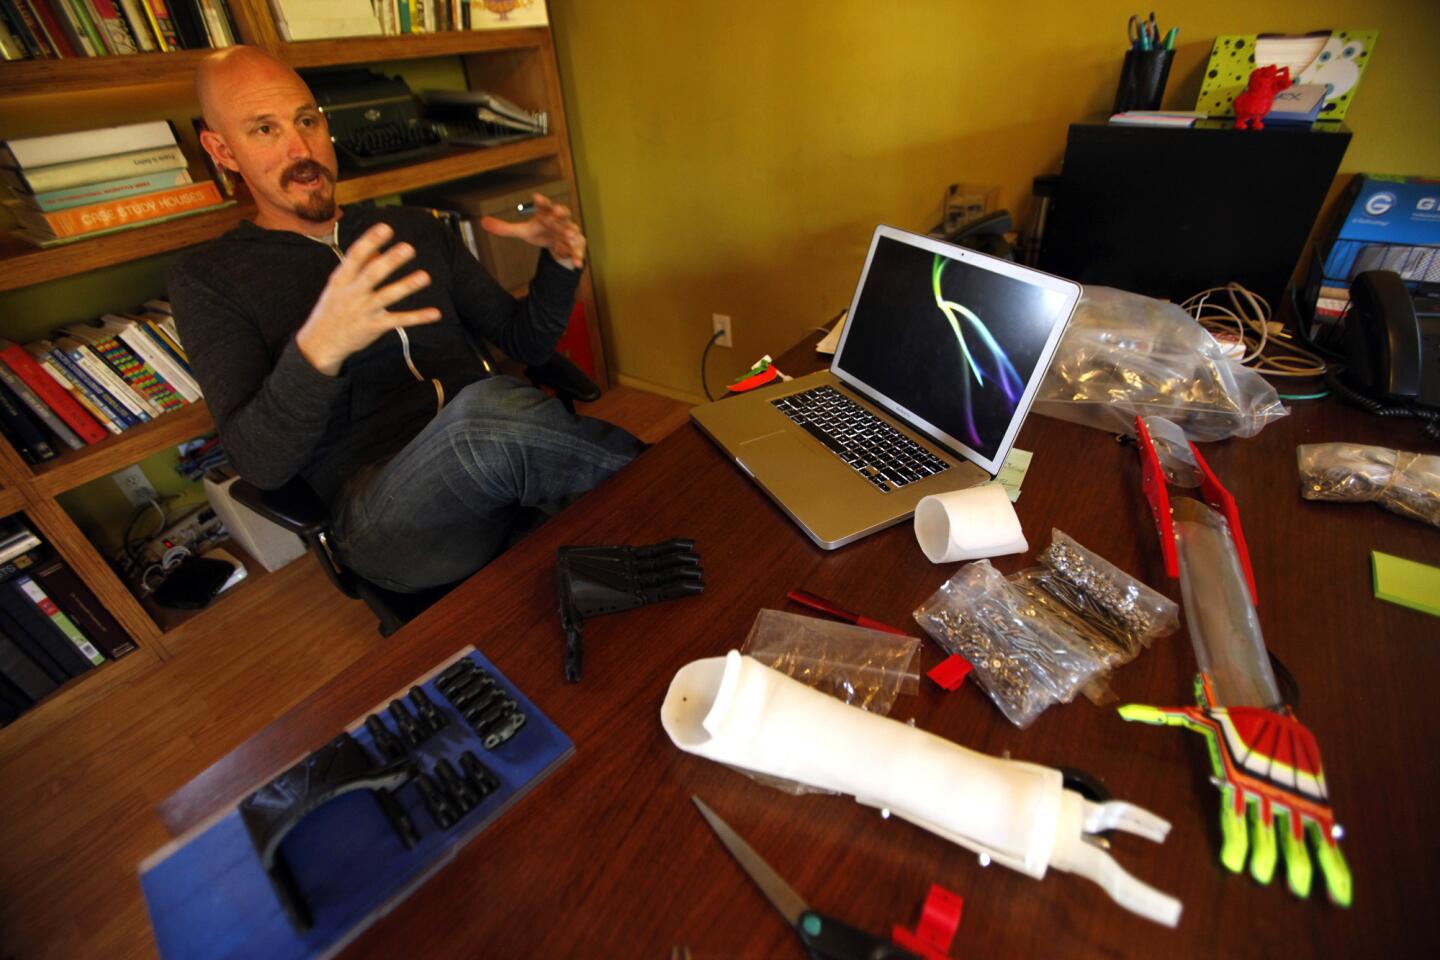 3-D printing of prostheses